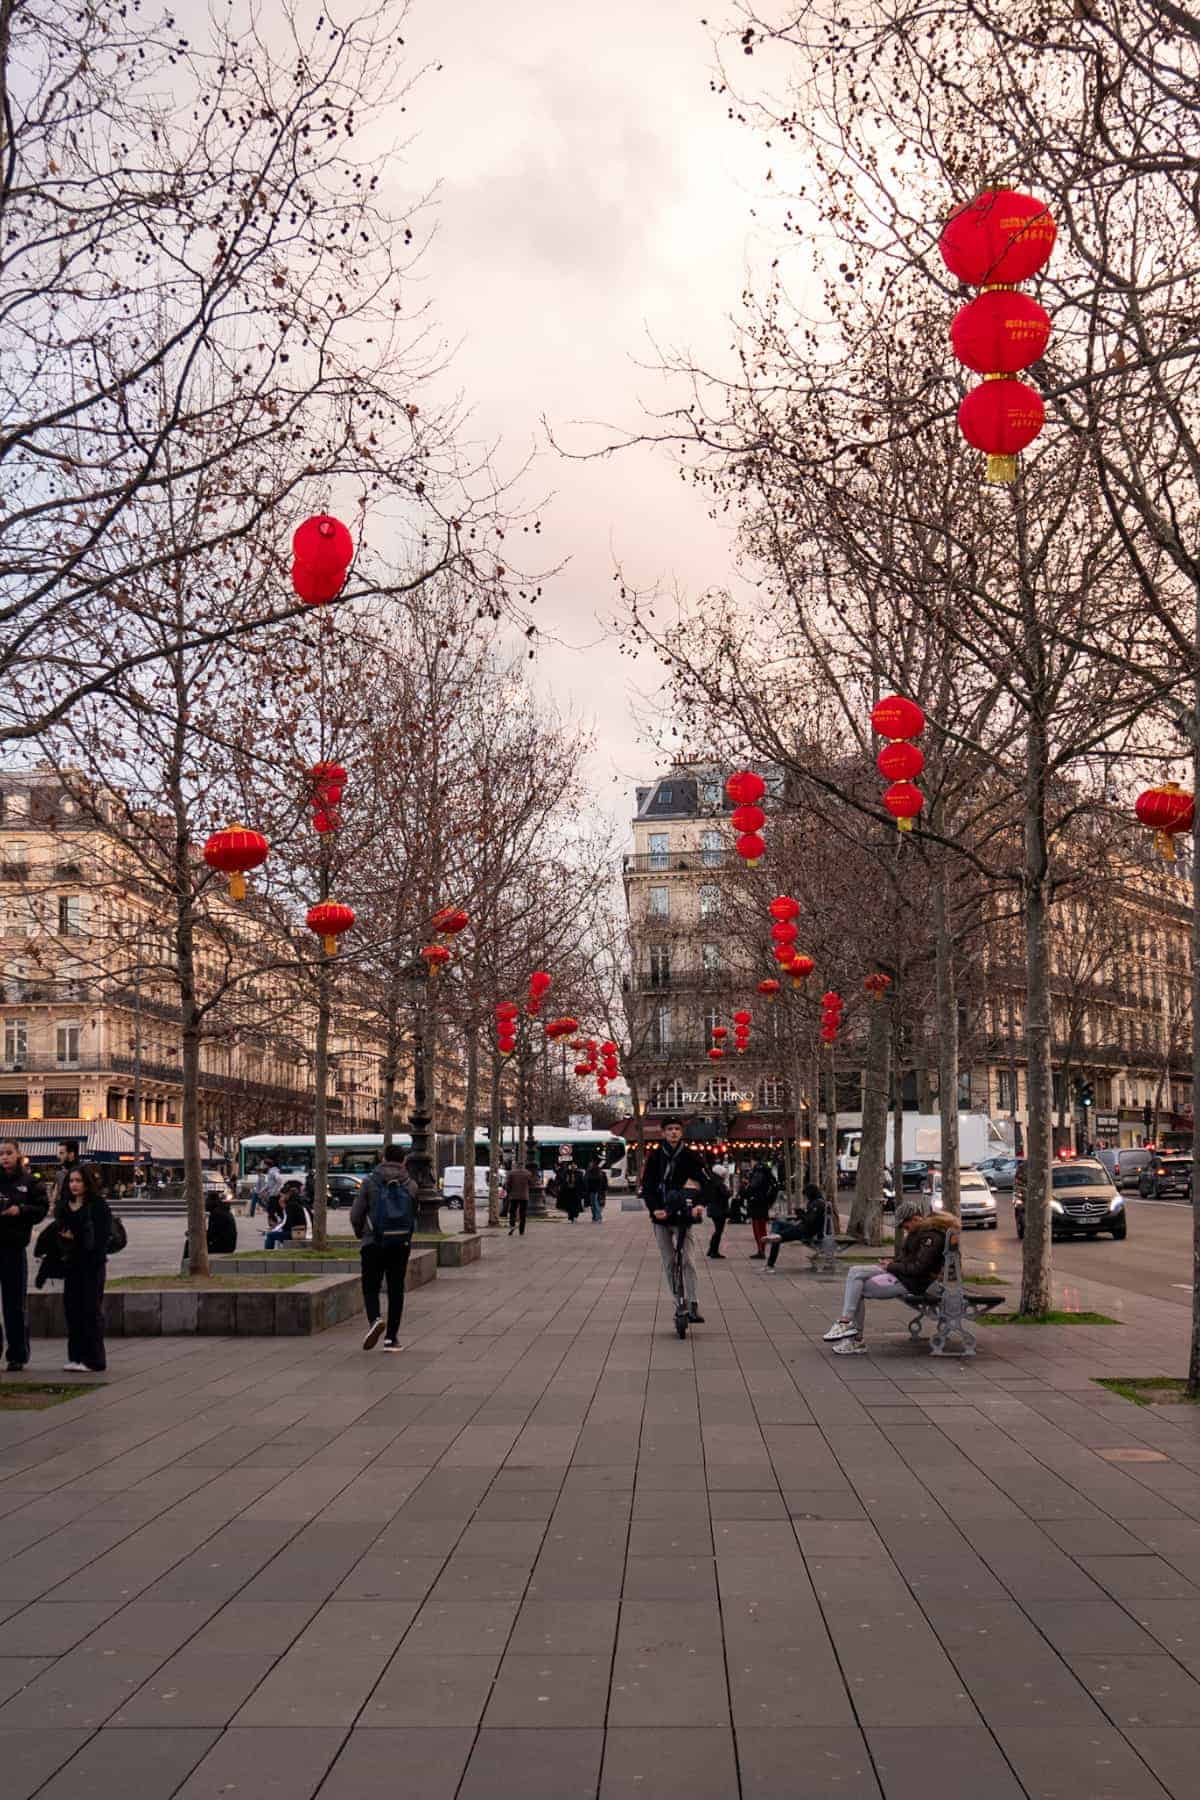 Place de la République in Paris decorated with red lanterns for Chinese New Year